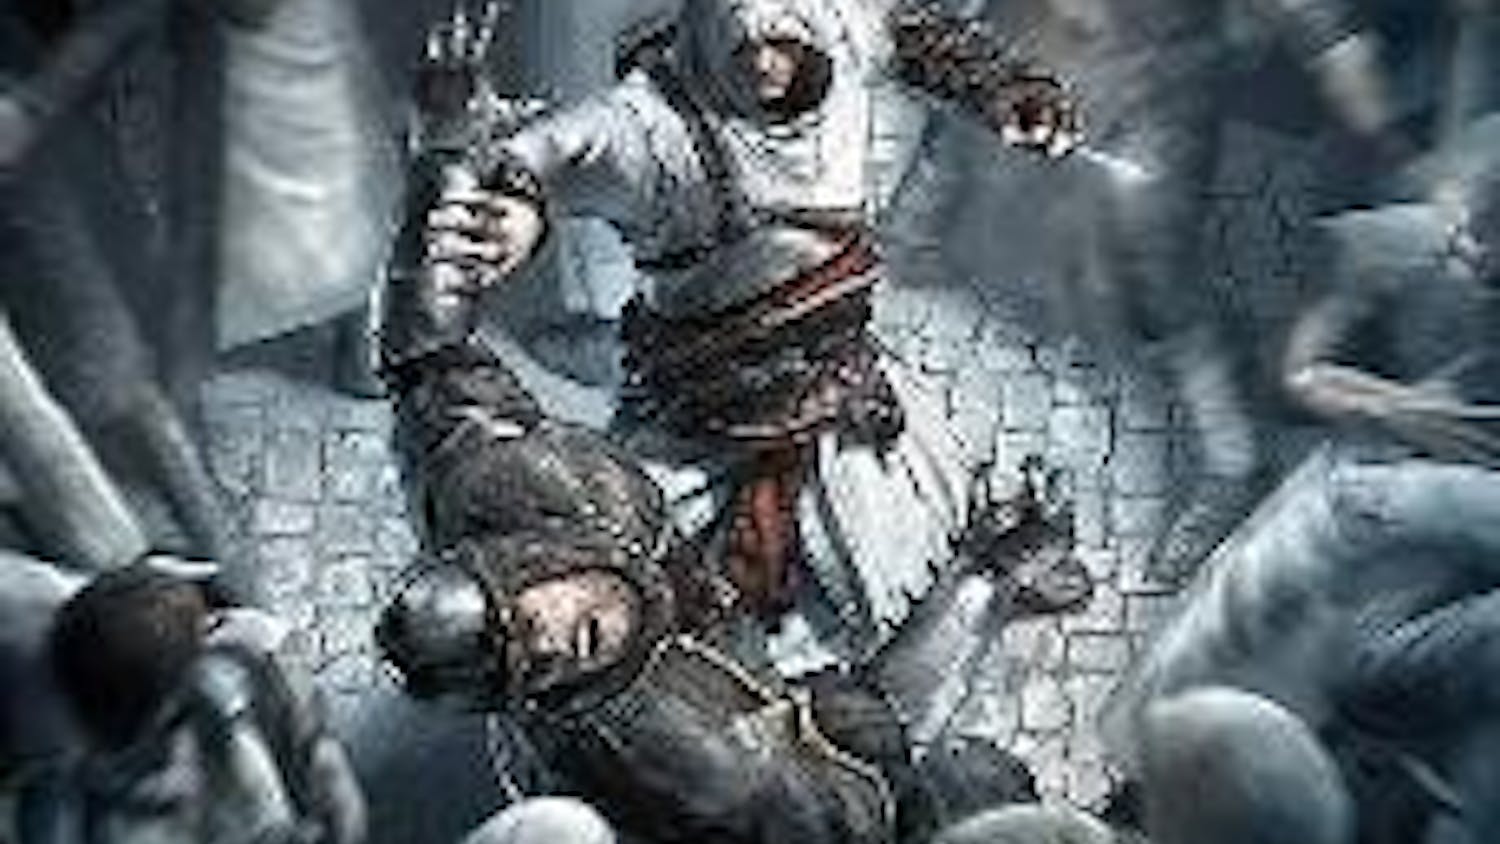 A FOR "ASSASSIN" - Altair, the protagonist of "Assassin's Creed," fights various enemies in the cities of Jerusalem, Acre and Damascus. He is on a quest to redeem himself after failing to kill an opponent and is working his way up the ladder of the myster